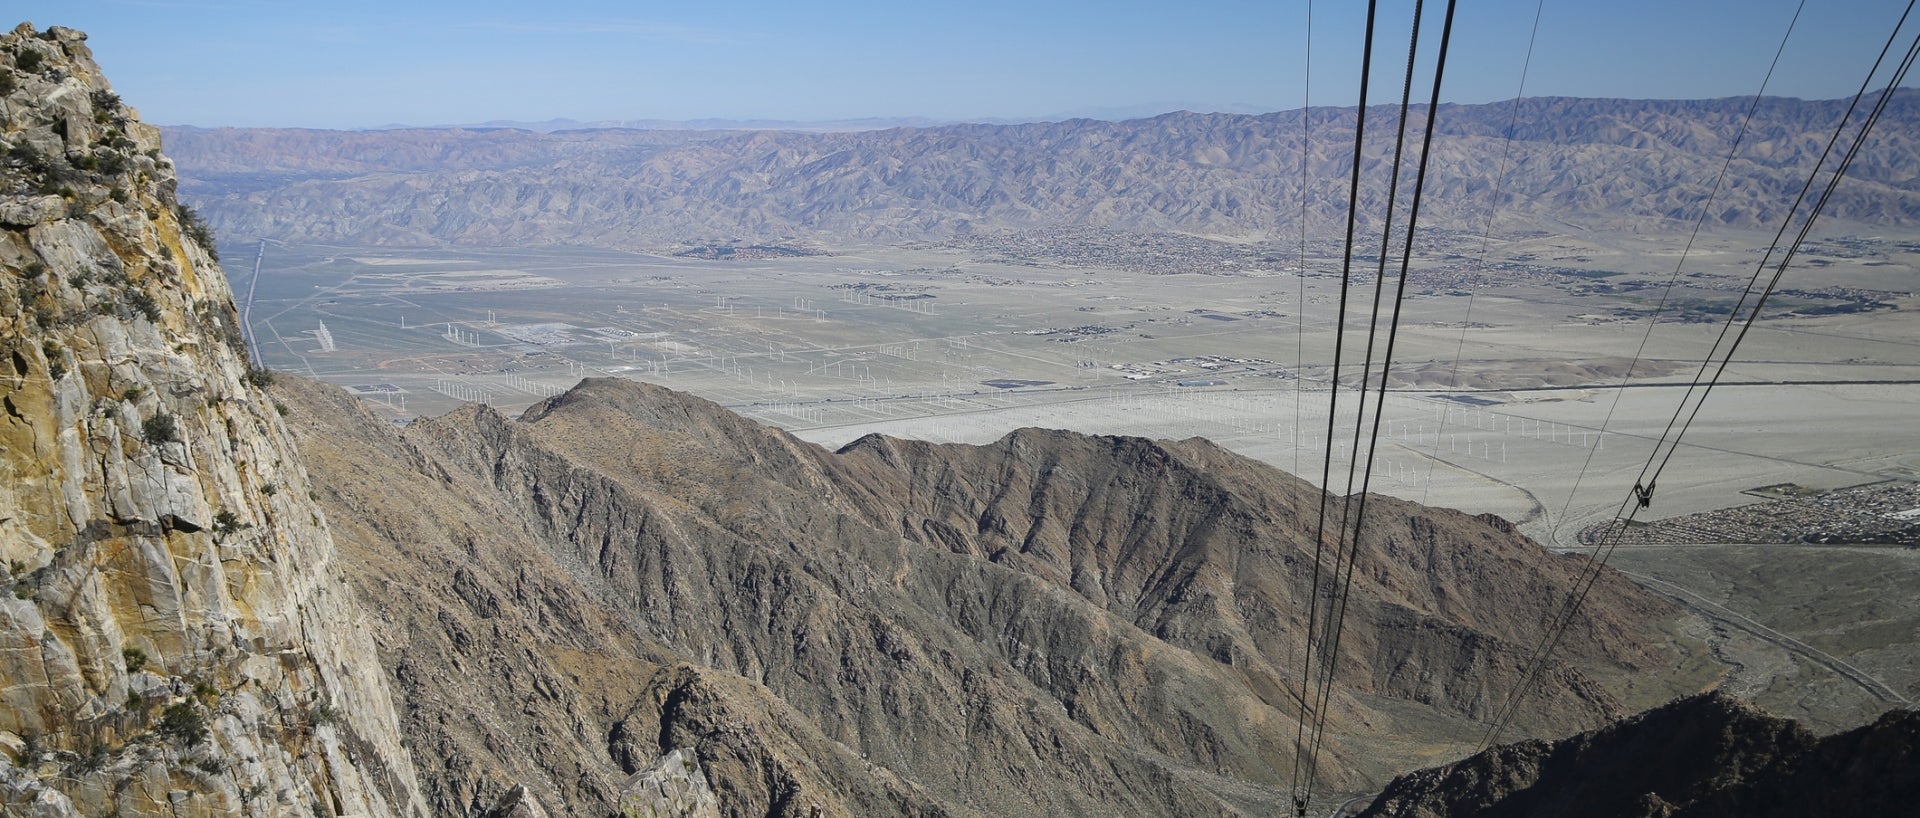 Scenery from atop the gondola viewpoint atop Mount San Jacinto in Palm Springs 